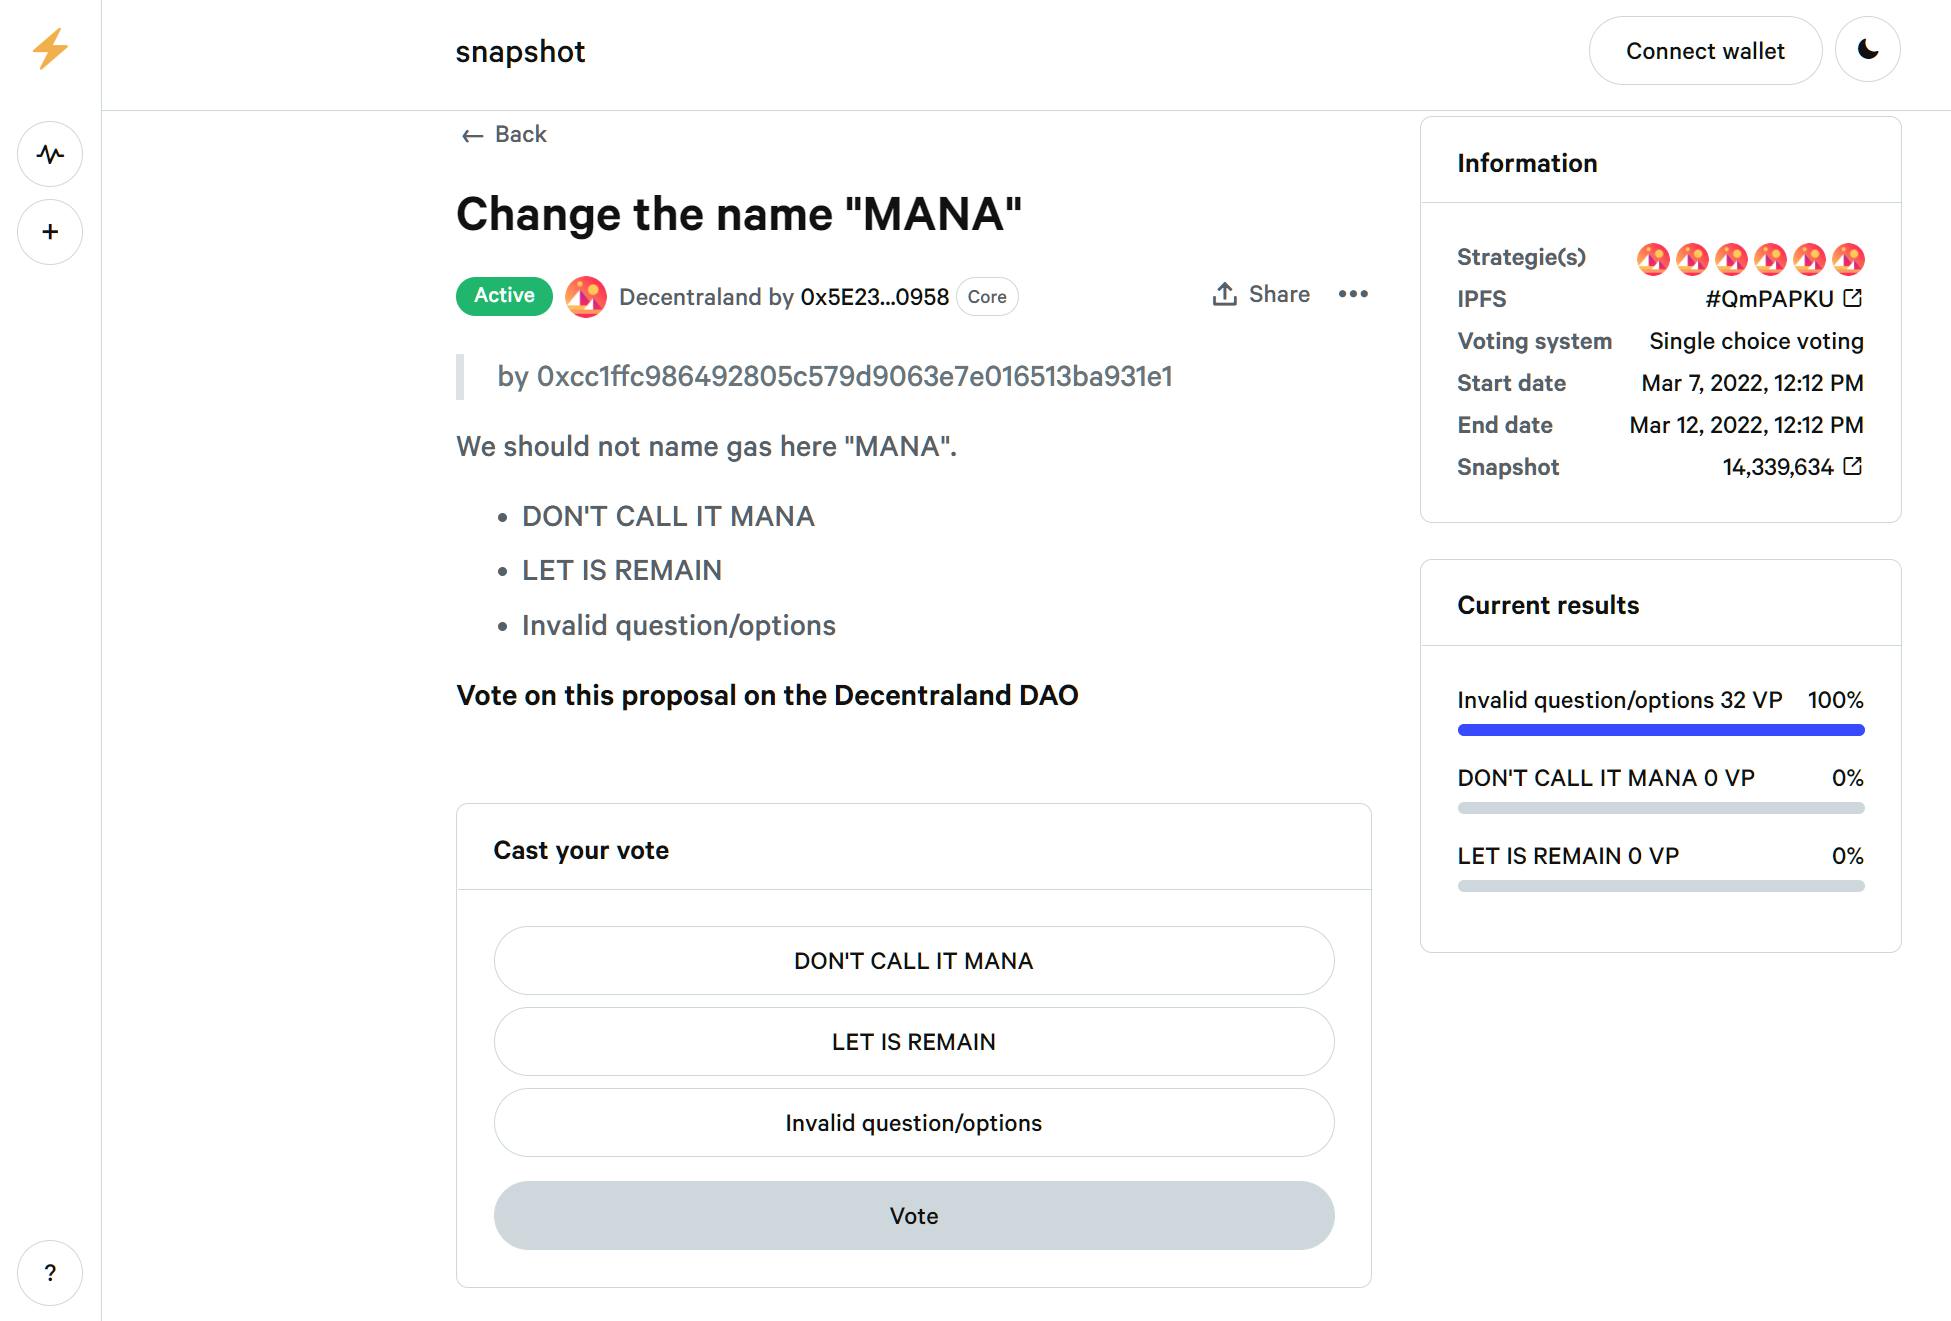 Decentraland proposal. "We should not name gas here MANA". This shows 100% of the 32 votes placed have gone to 'invalid question'.